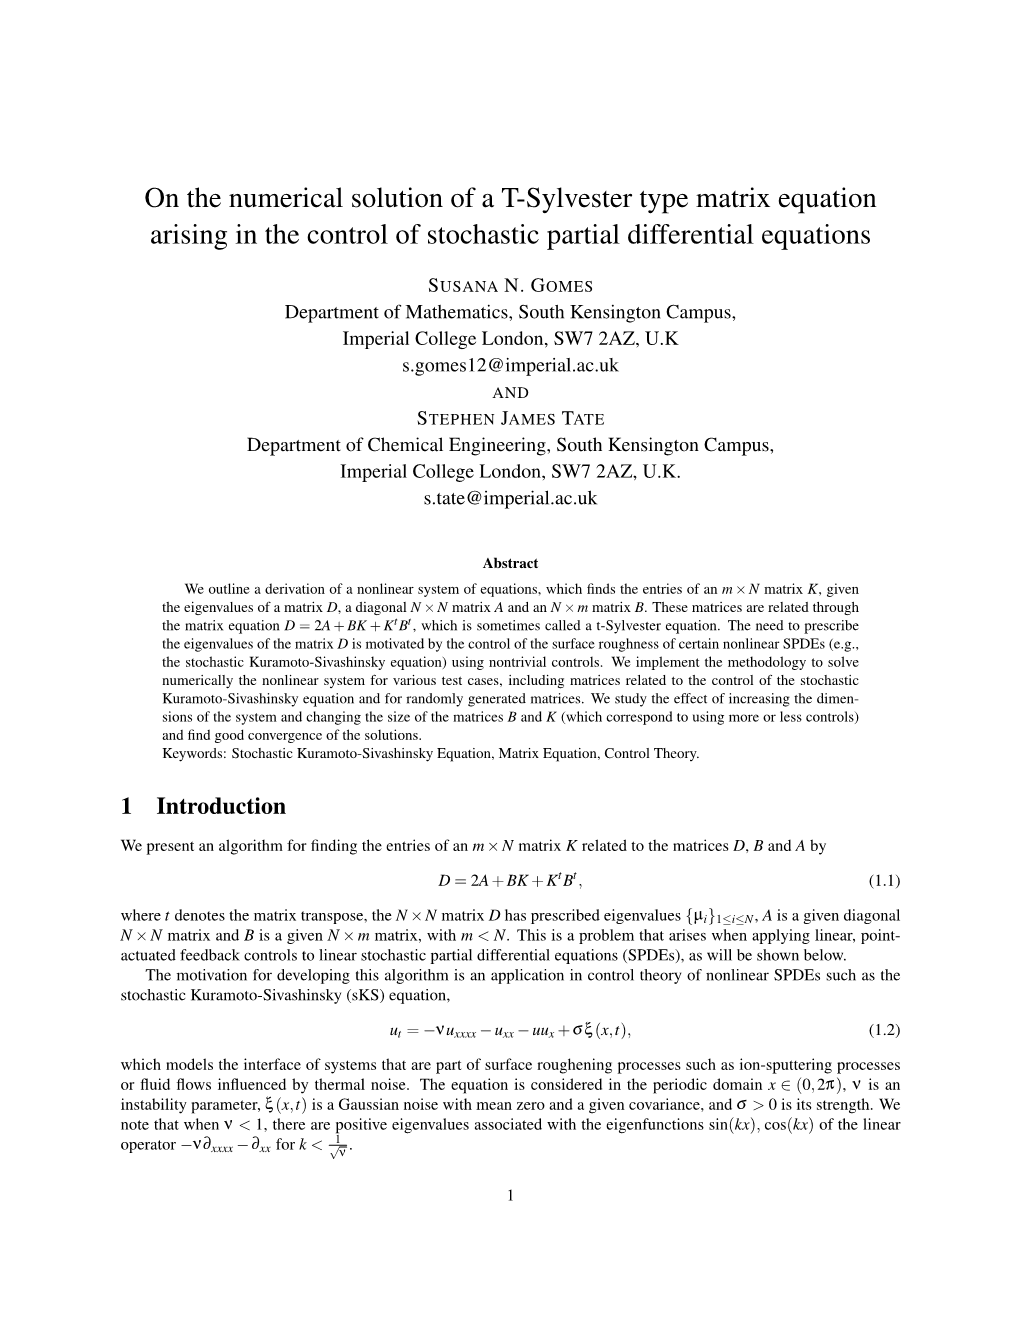 On the Numerical Solution of a T-Sylvester Type Matrix Equation Arising in the Control of Stochastic Partial Differential Equations